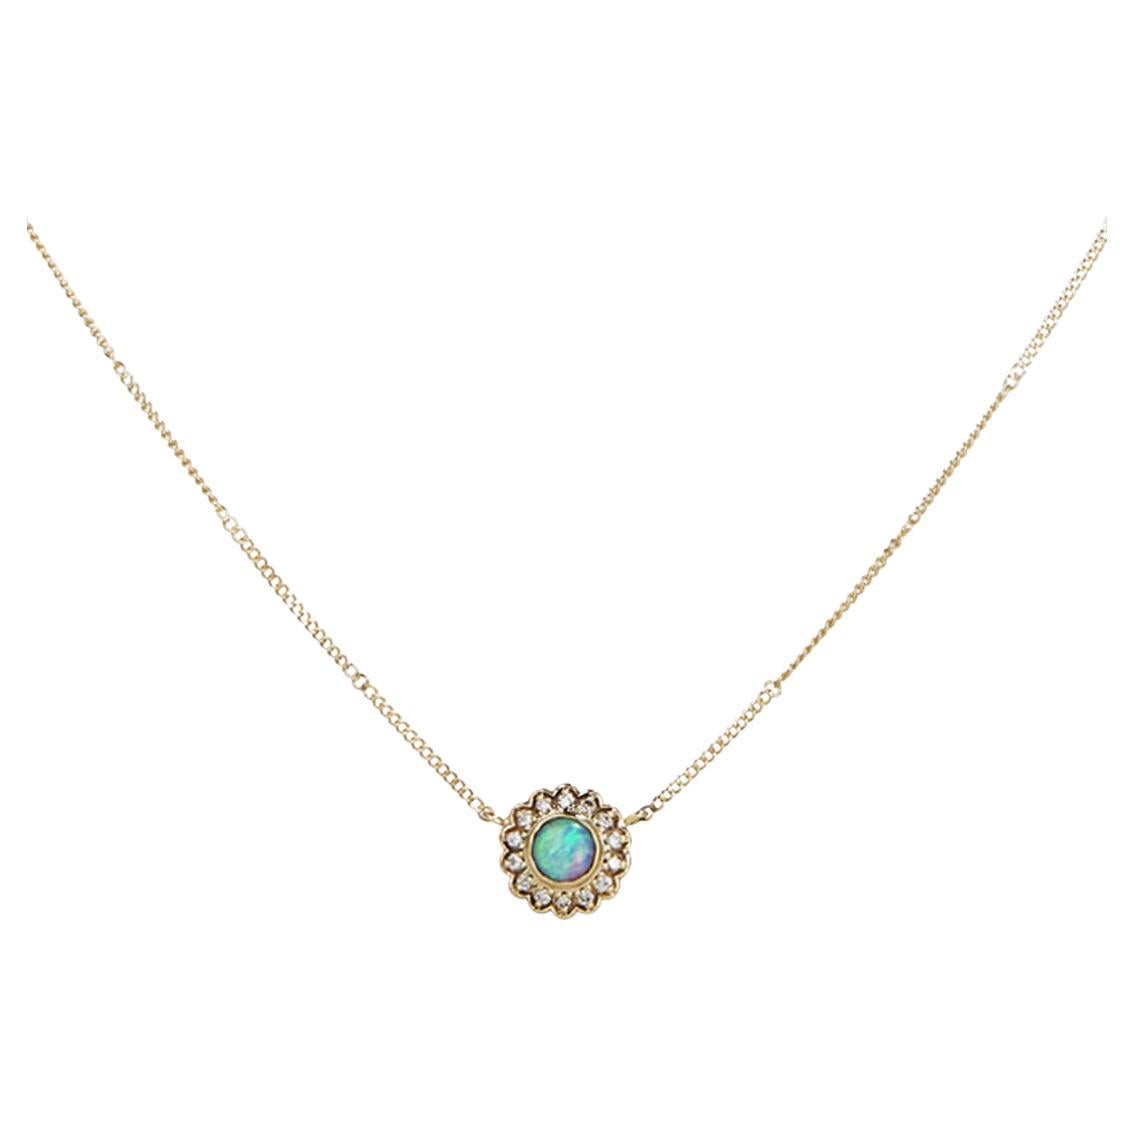 DETAILS
COLOR: Yellow gold
COMPOSITION: 14kt yellow gold
Center Australian opal totalling 0.19ct
Diamonds totalling 0.085ct  

SIZE AND FIT
Pendant 9.3 x 9.3mm 
Chain length 42cm